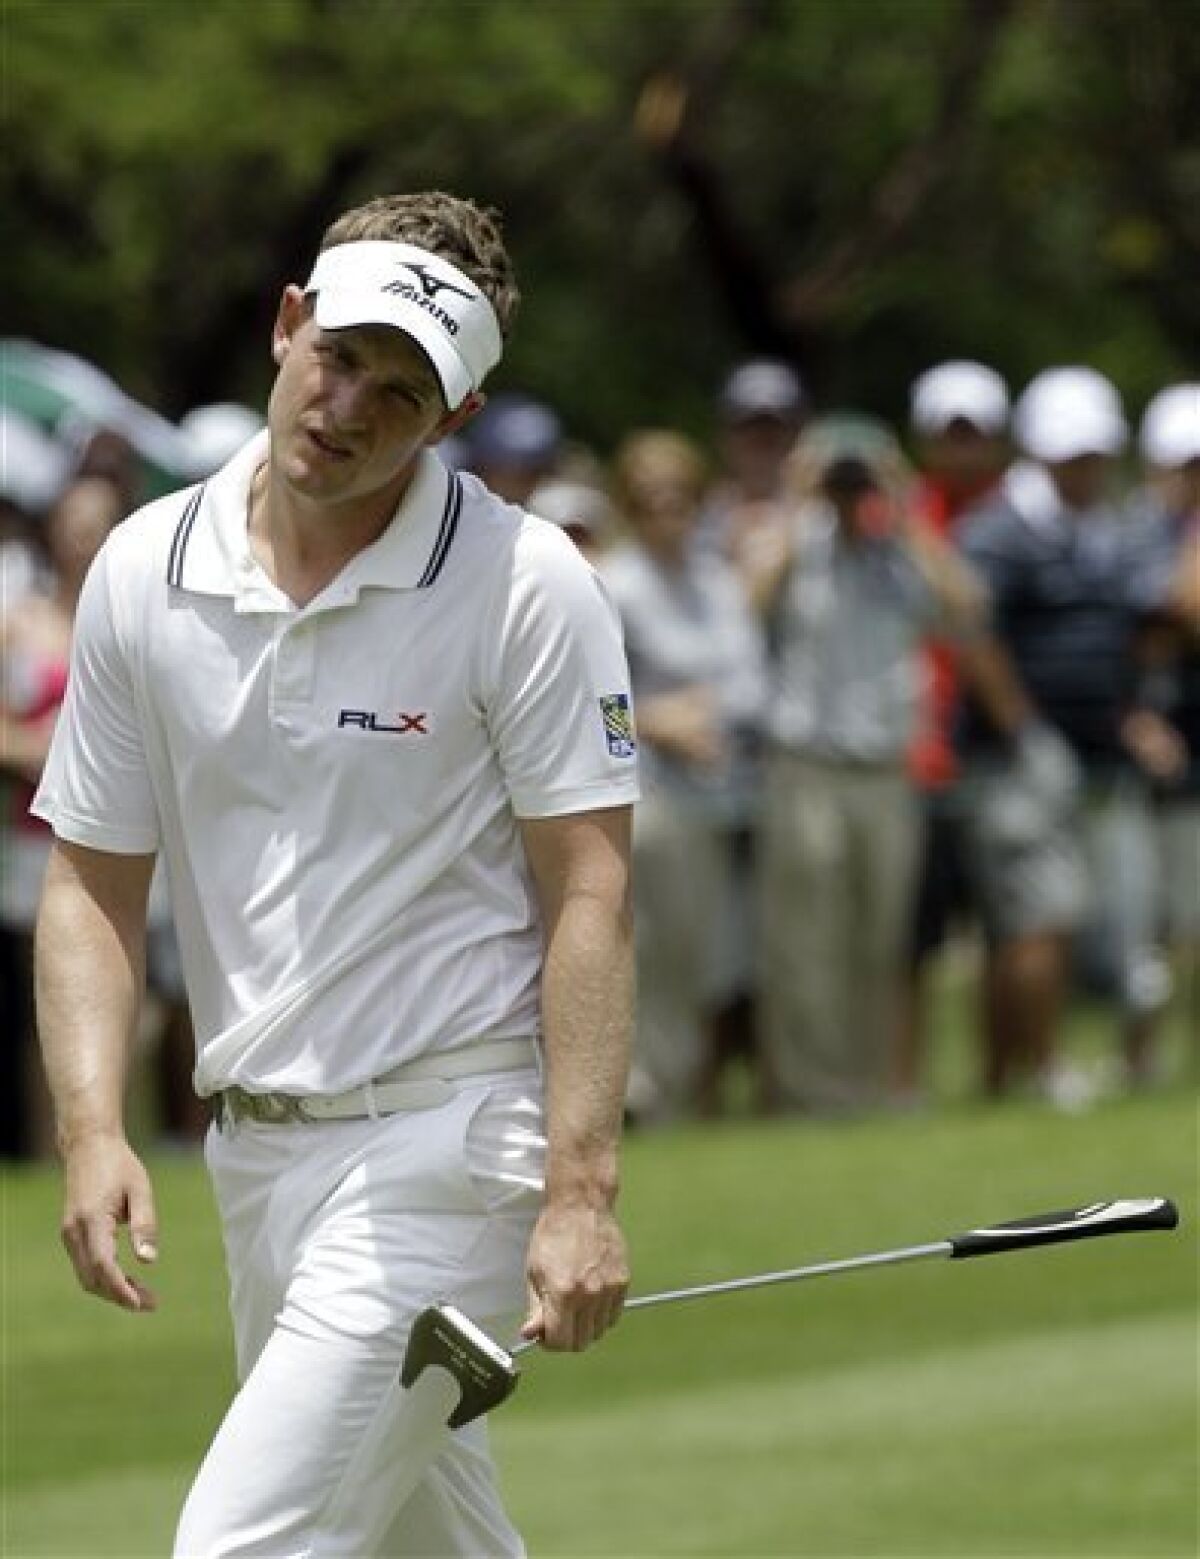 British golfer Luke Donald reacts on the 12th hole during the Nedbank Golf Challenge in Sun City, South Africa on Sunday Dec. 4, 2011. (AP Photo/Themba Hadebe)